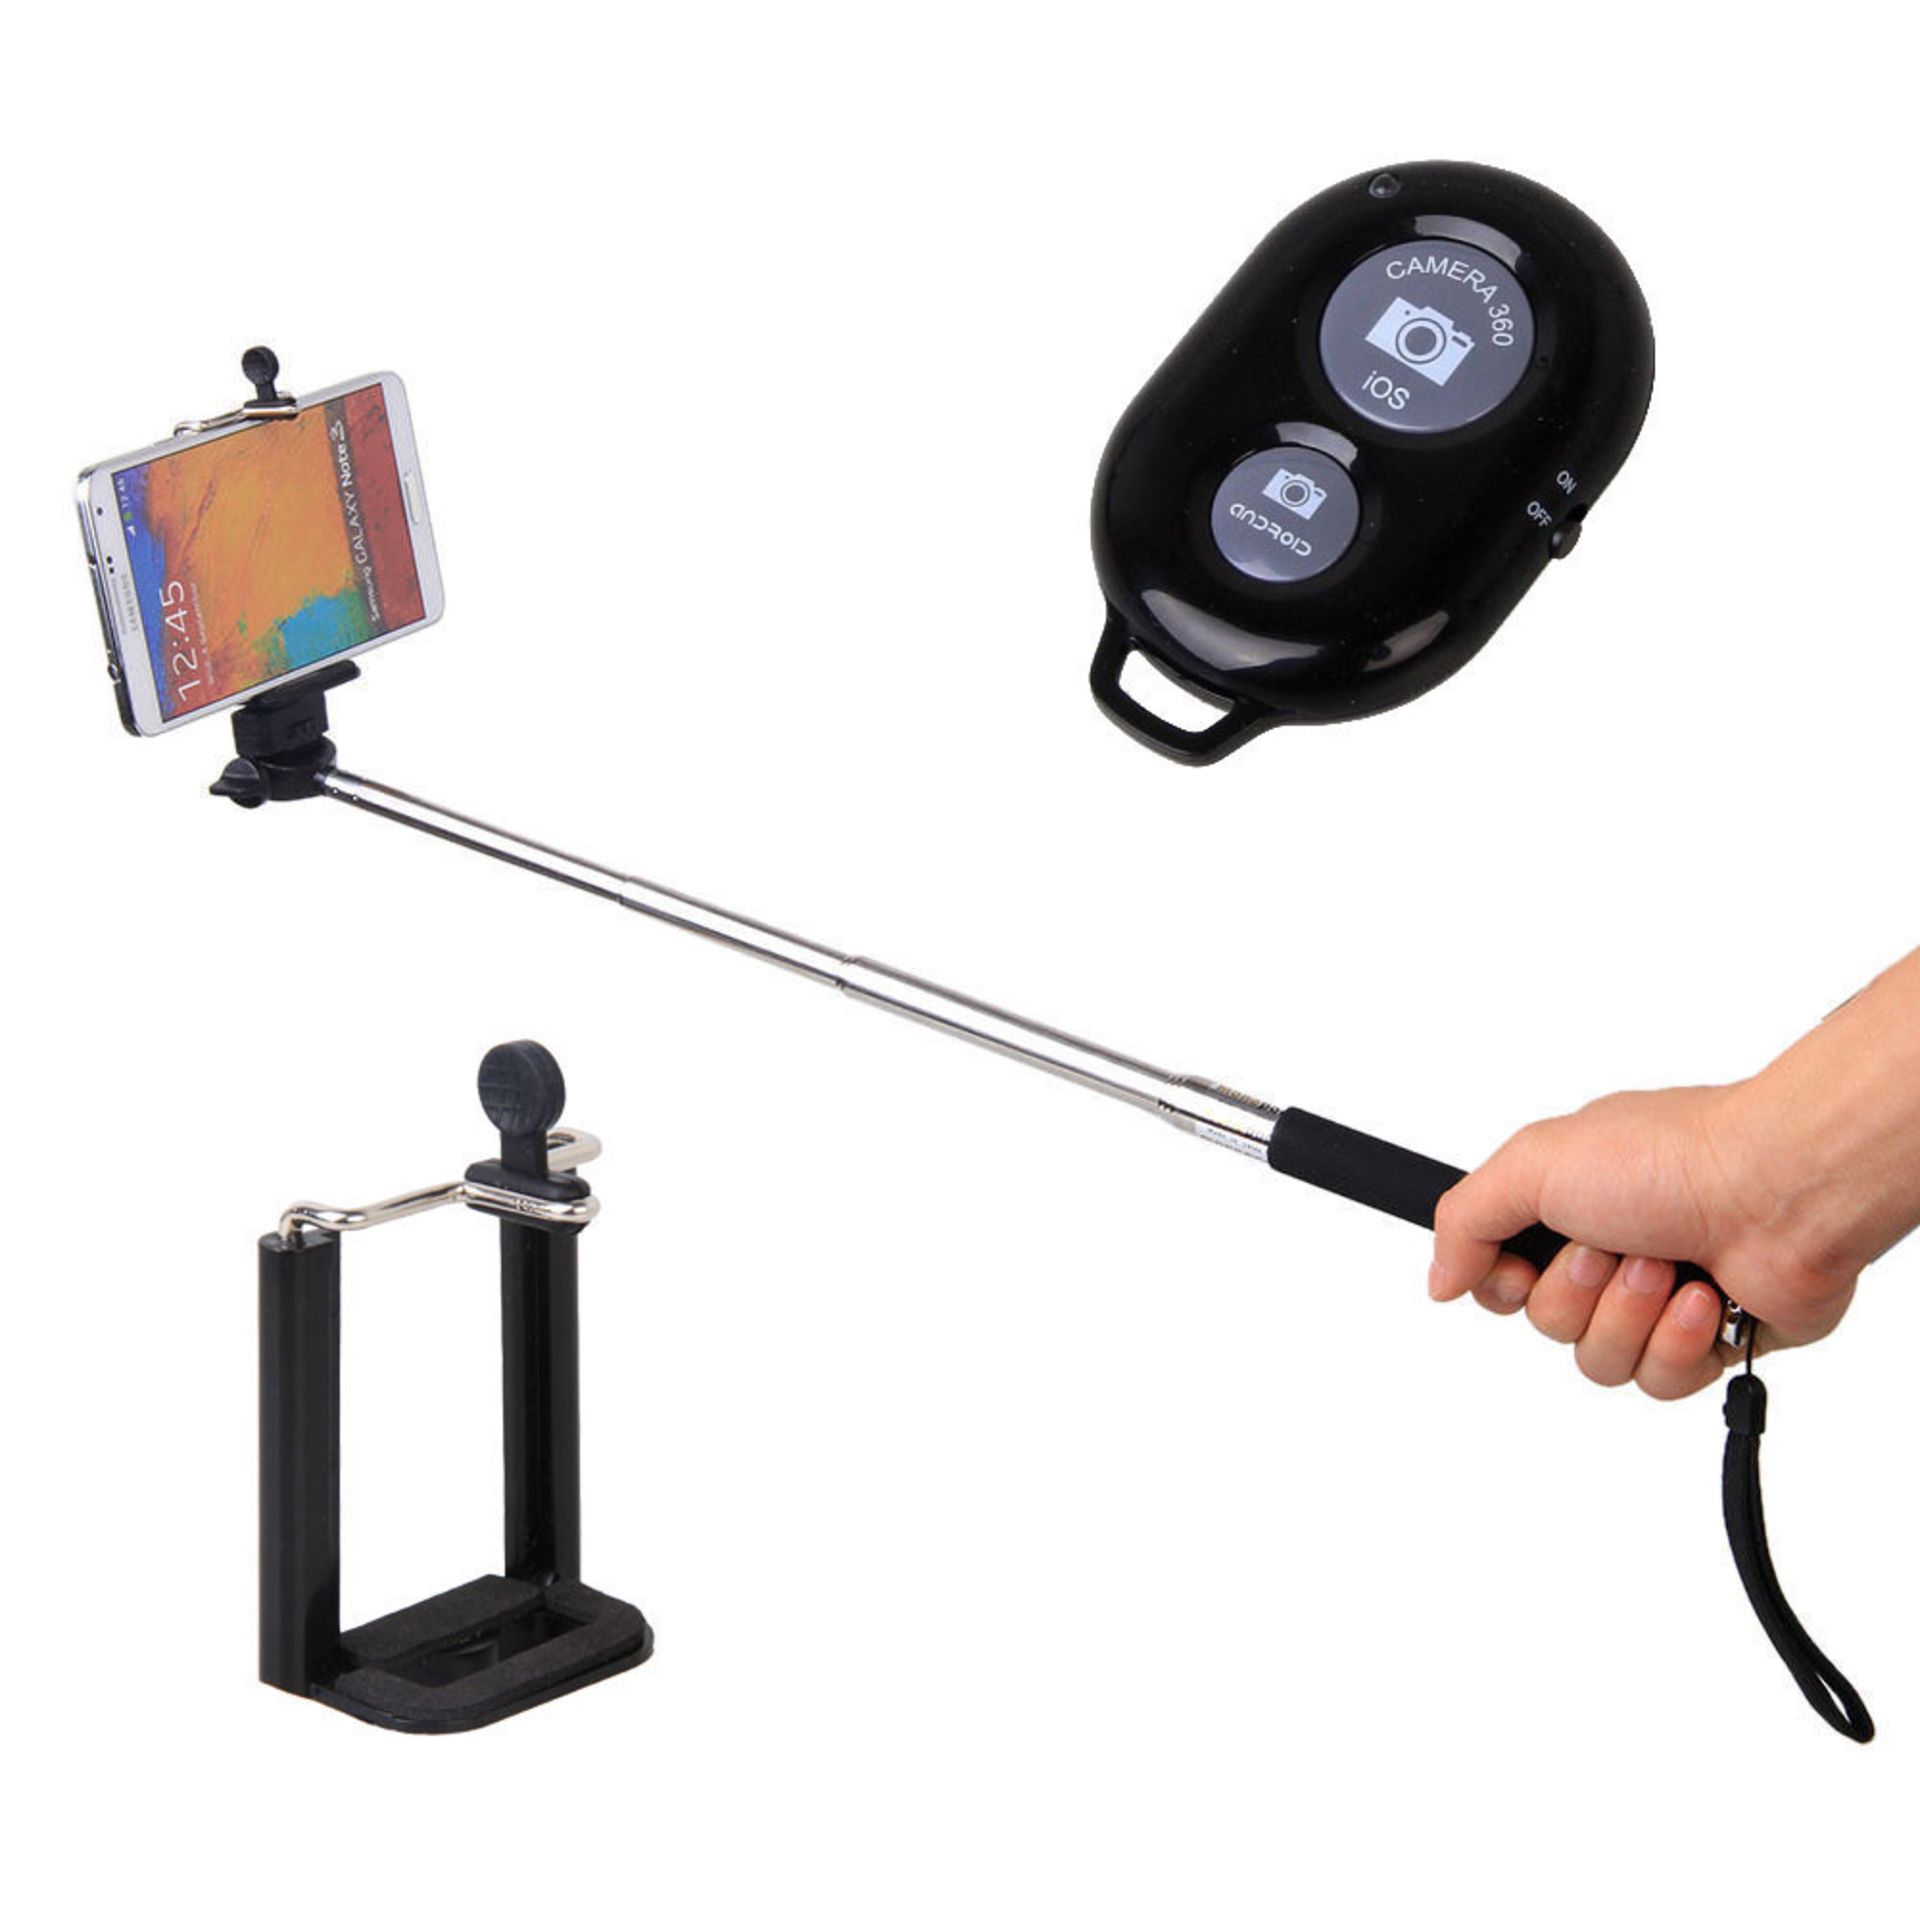 V Brand New Selfie Stick with Bluetooth Remote Control - RRP £19.09 X 2 YOUR BID PRICE TO BE